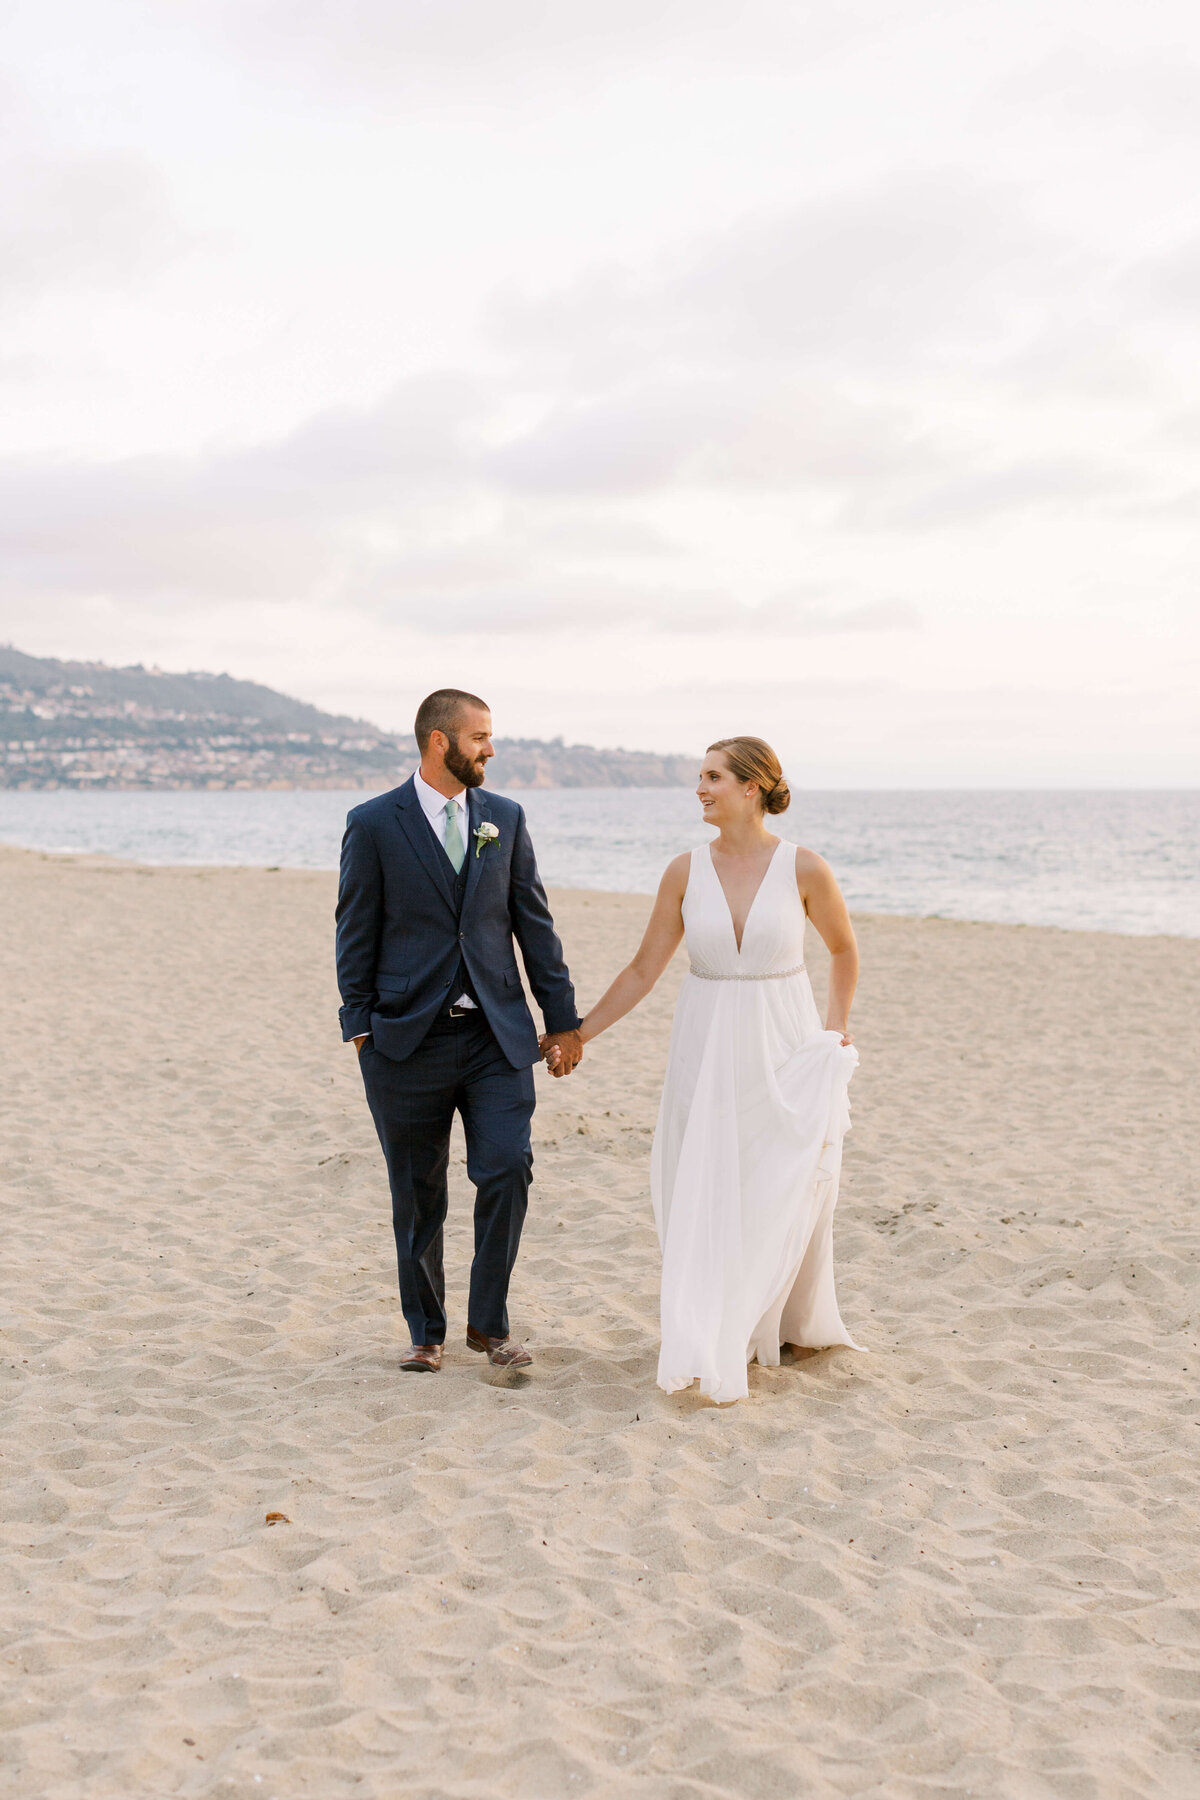 Bride and groom walk hand in hand down the beach in Southern California after celebrating their wedding day together